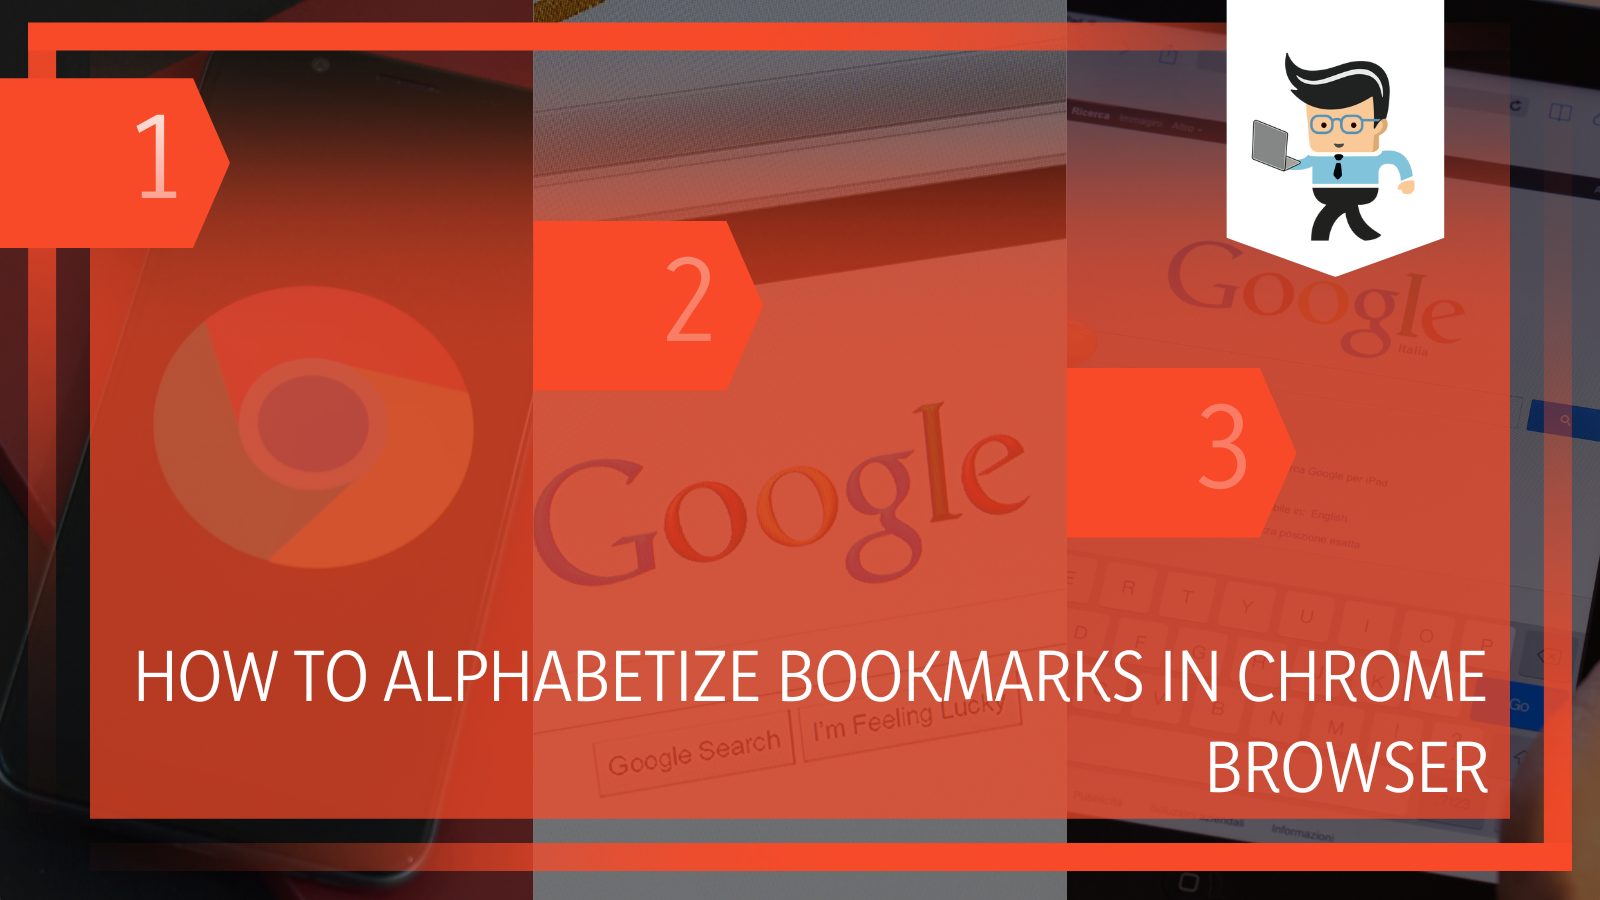 Alphabetize Bookmarks in Chrome Browser